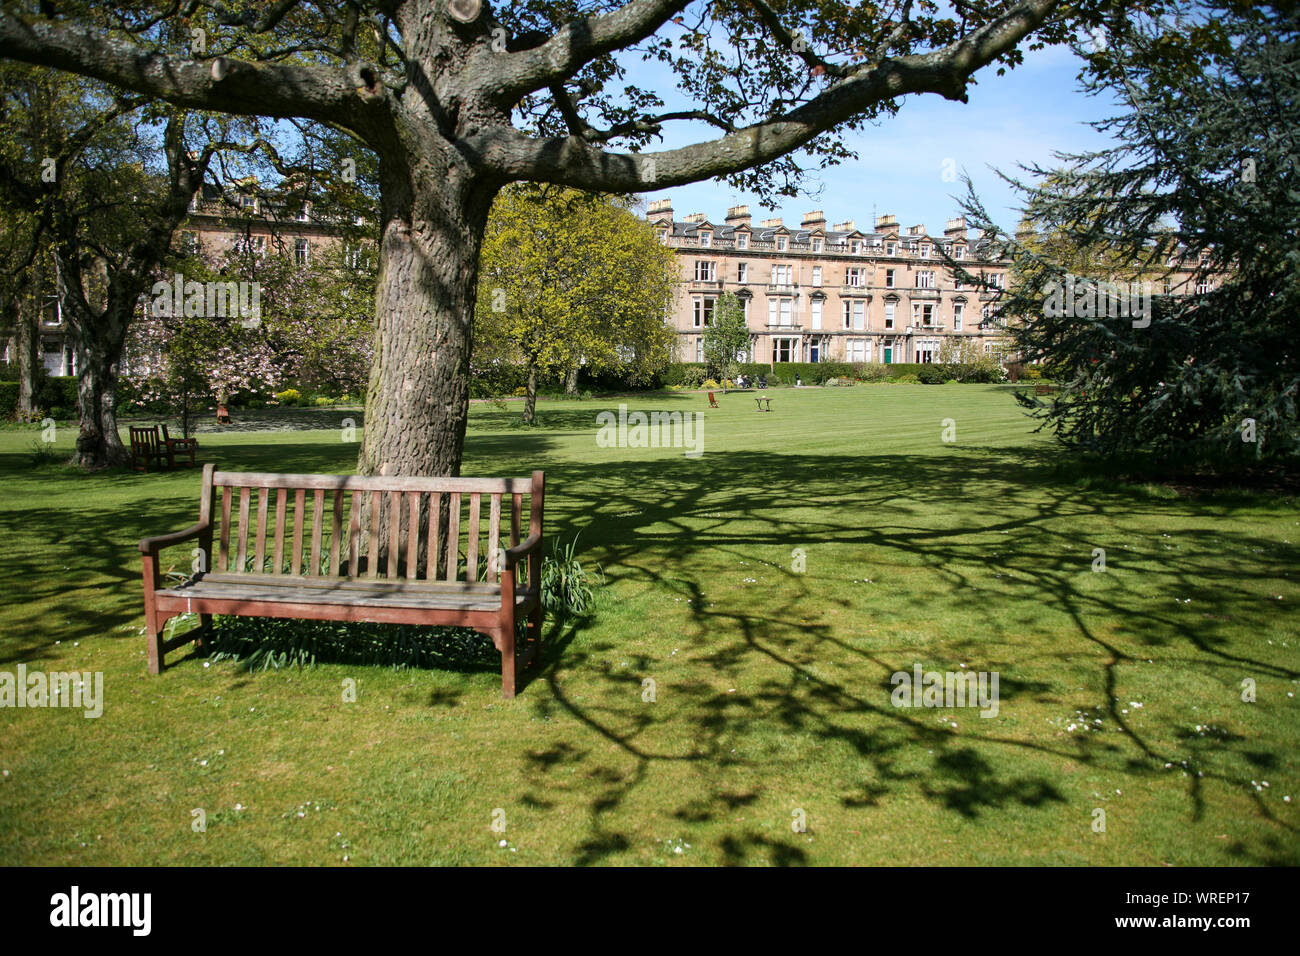 Private Gardens Edinburgh - Membership is limited to the 'few' in parts of Anglo-Edinburgh. Stock Photo